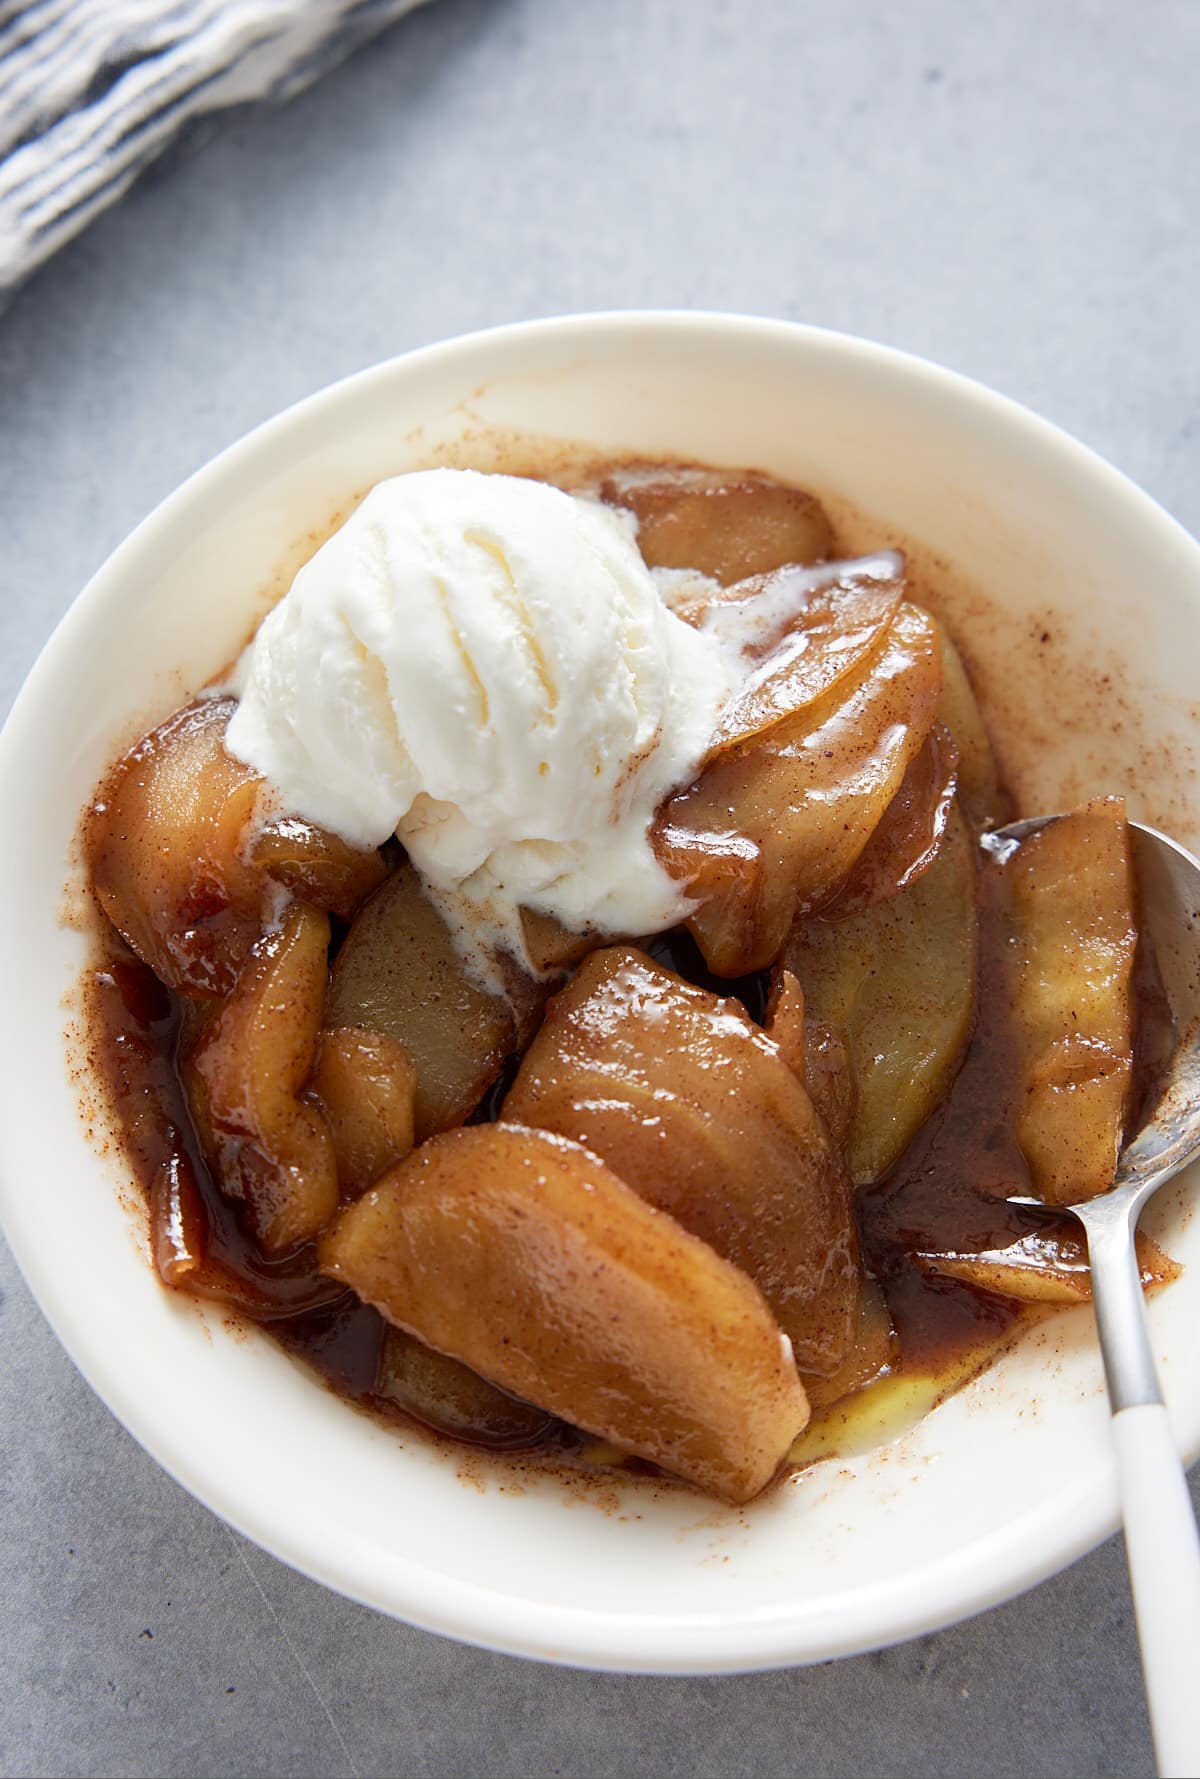 Southern fried apples in a white bowl with a scoop of ice cream and a dessert spoon